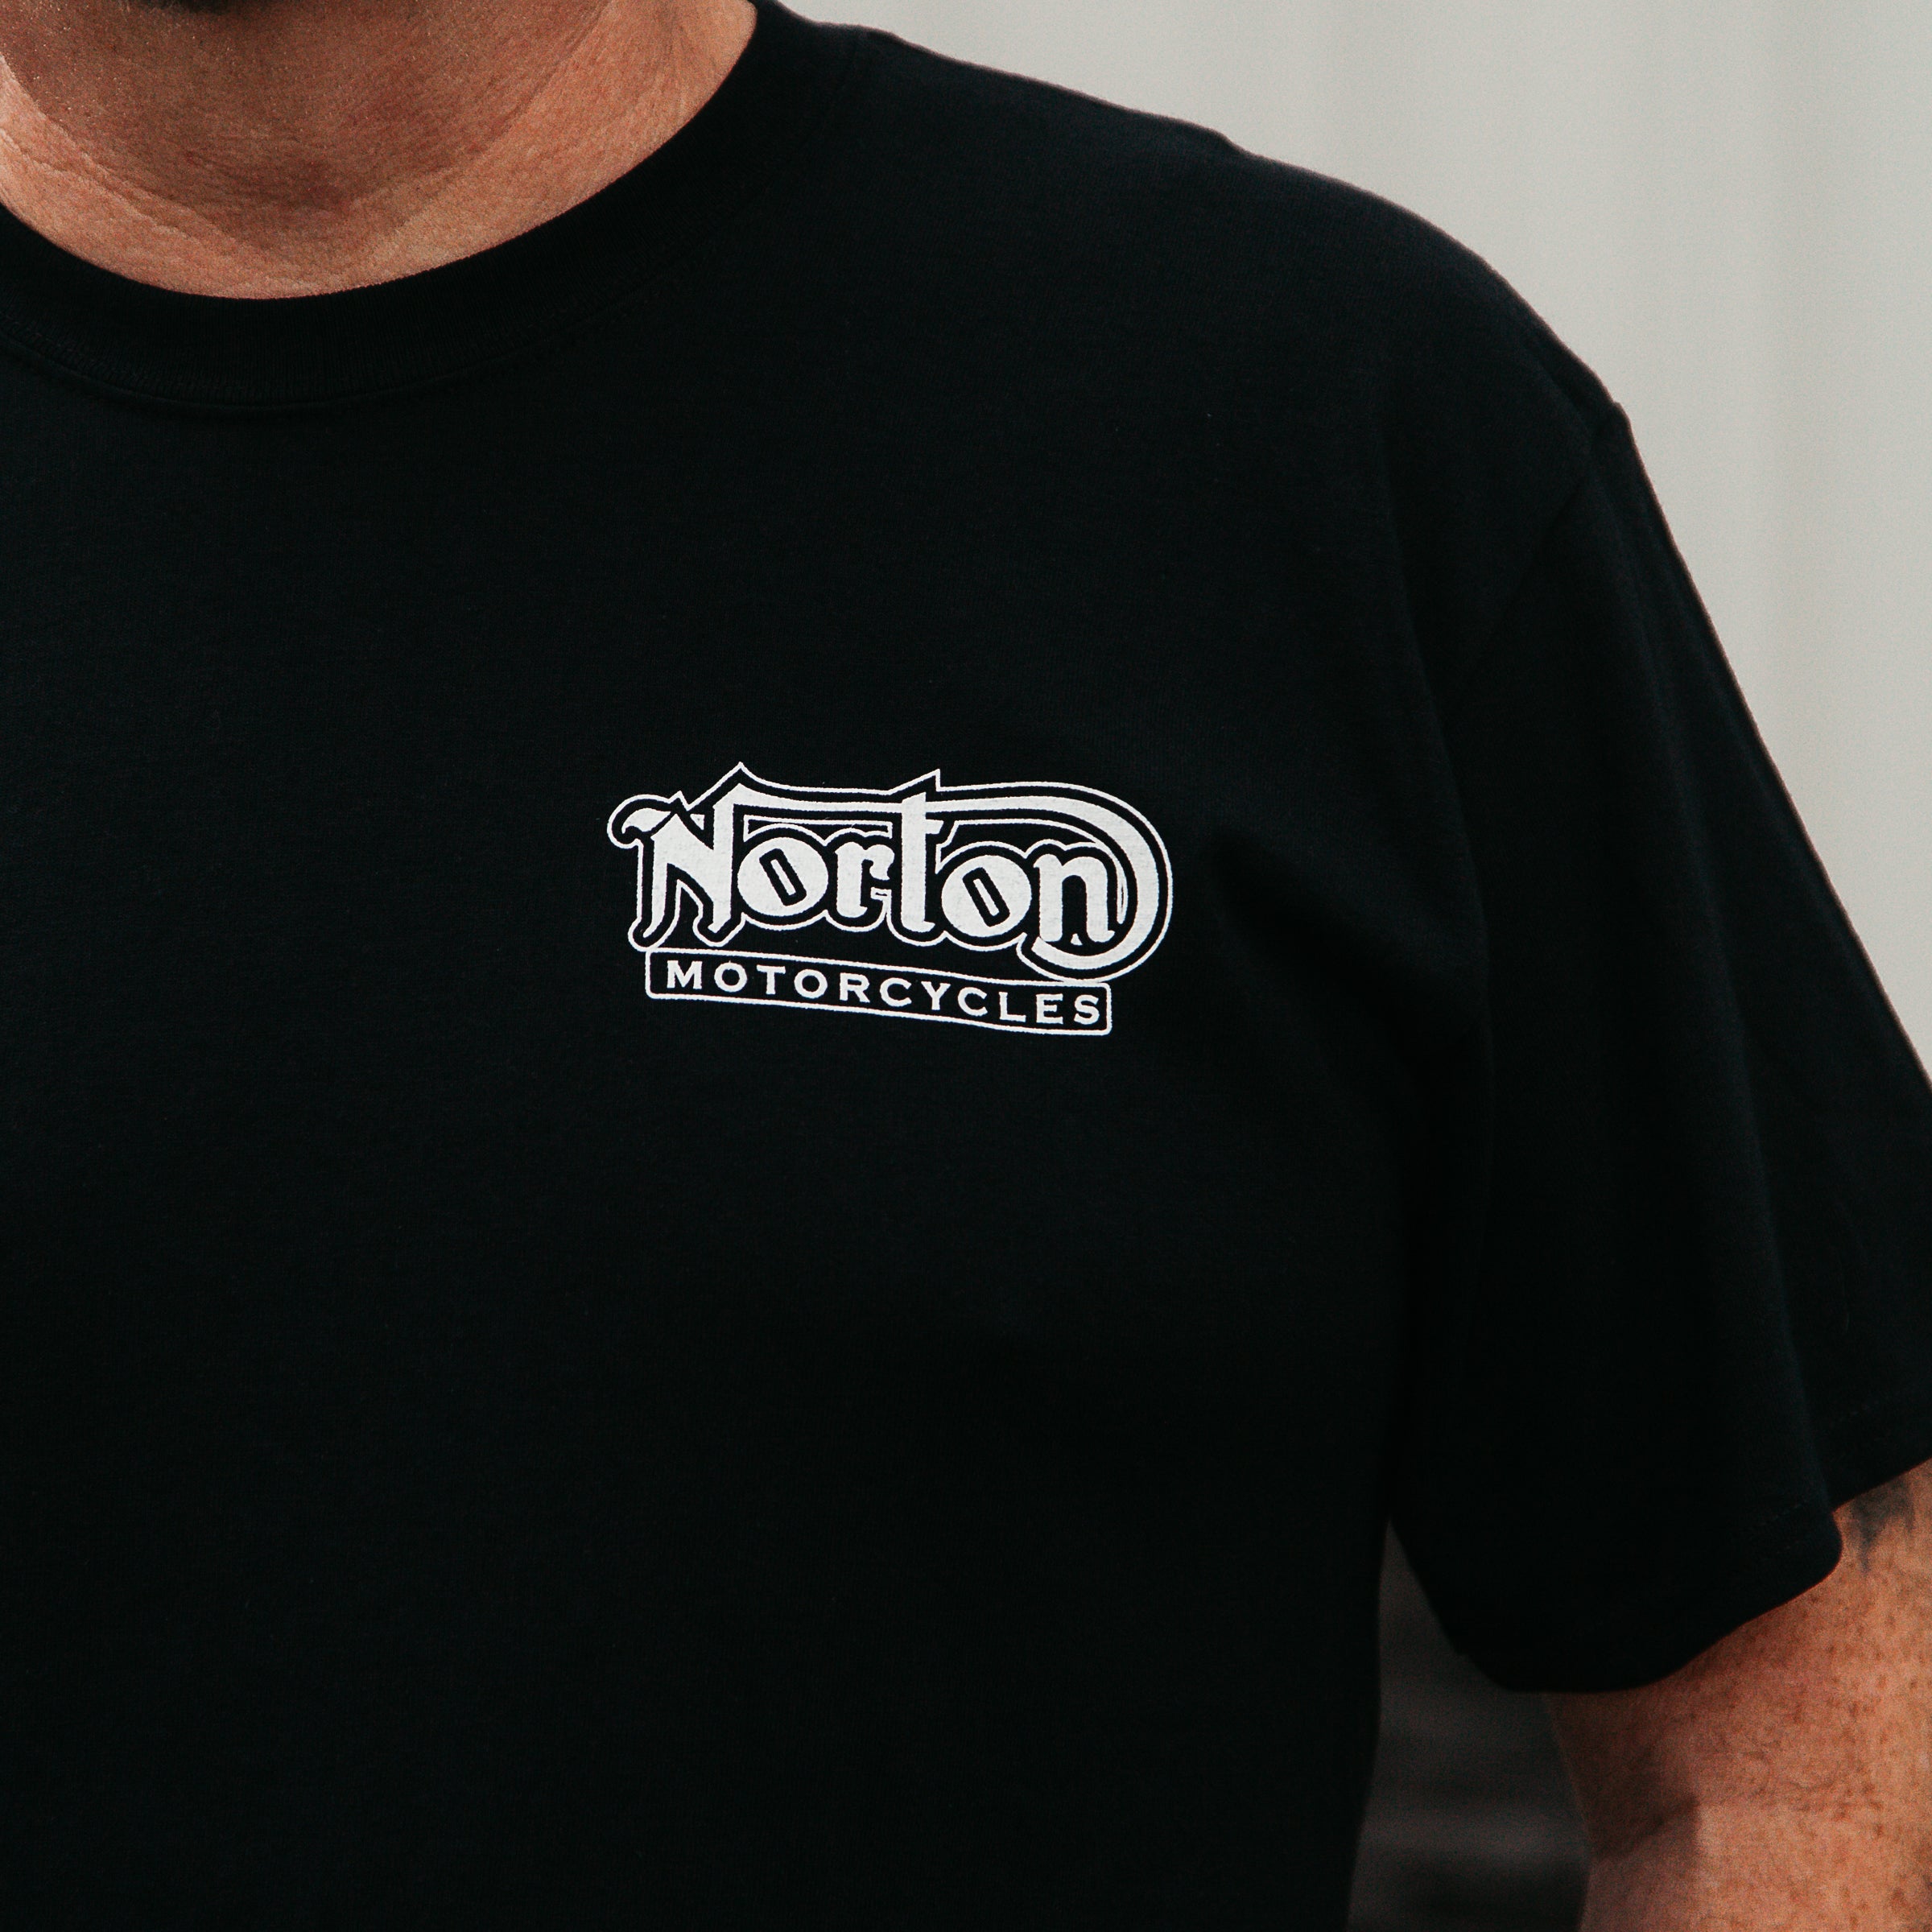 Dreamcycle Motorcycle Museum |  Photo of mans shoulder wearing a black shirt with the text "Norton motorcycles|